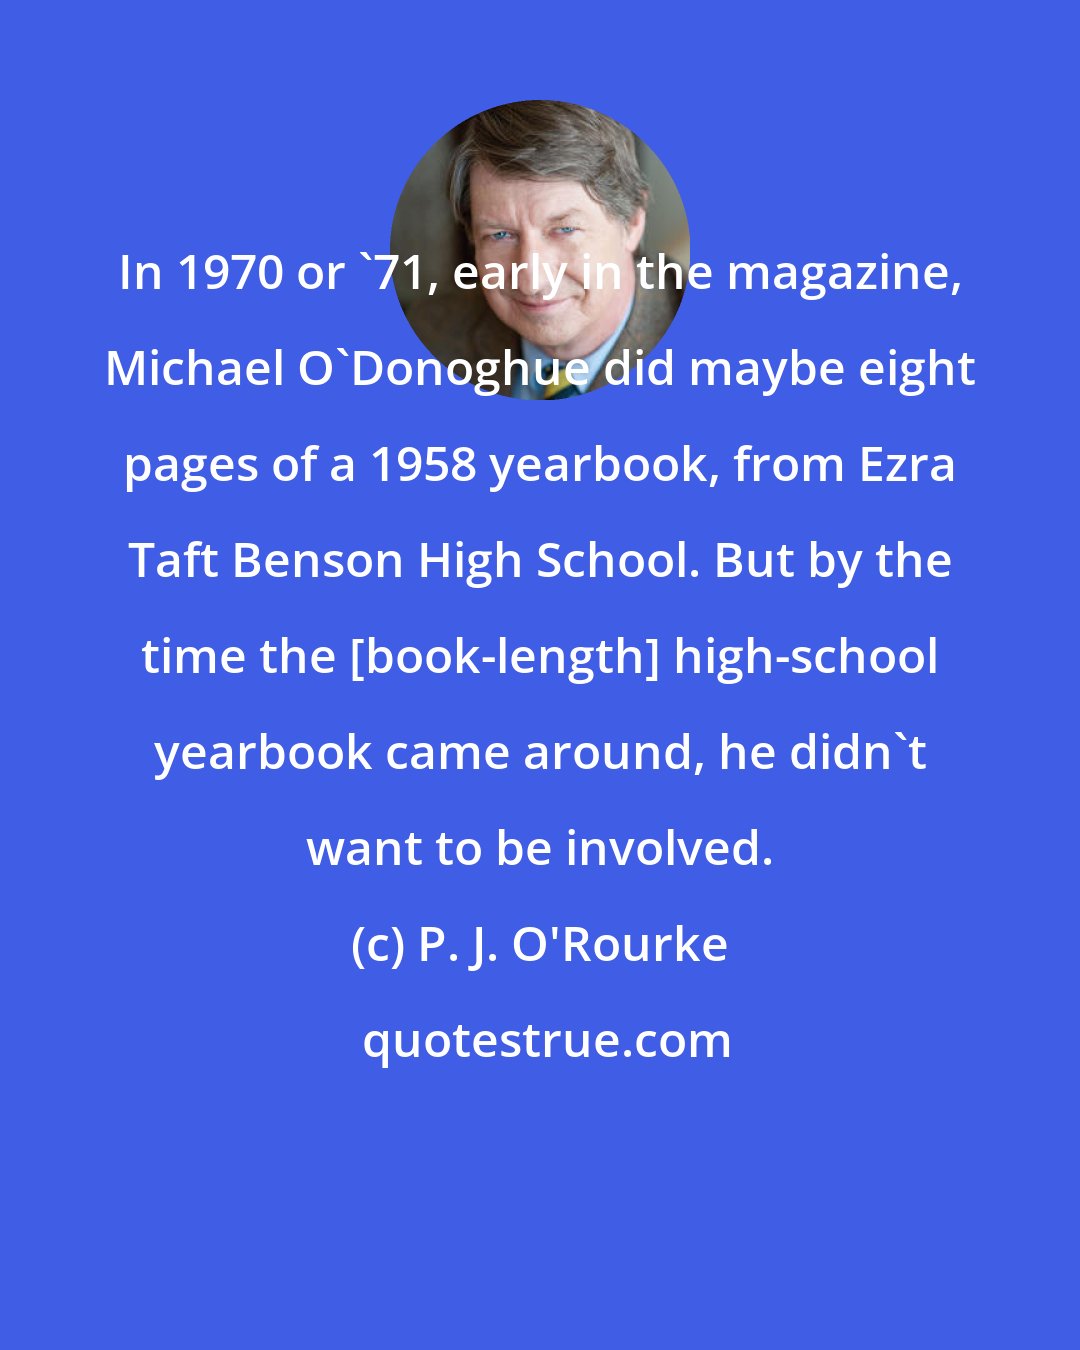 P. J. O'Rourke: In 1970 or '71, early in the magazine, Michael O'Donoghue did maybe eight pages of a 1958 yearbook, from Ezra Taft Benson High School. But by the time the [book-length] high-school yearbook came around, he didn't want to be involved.